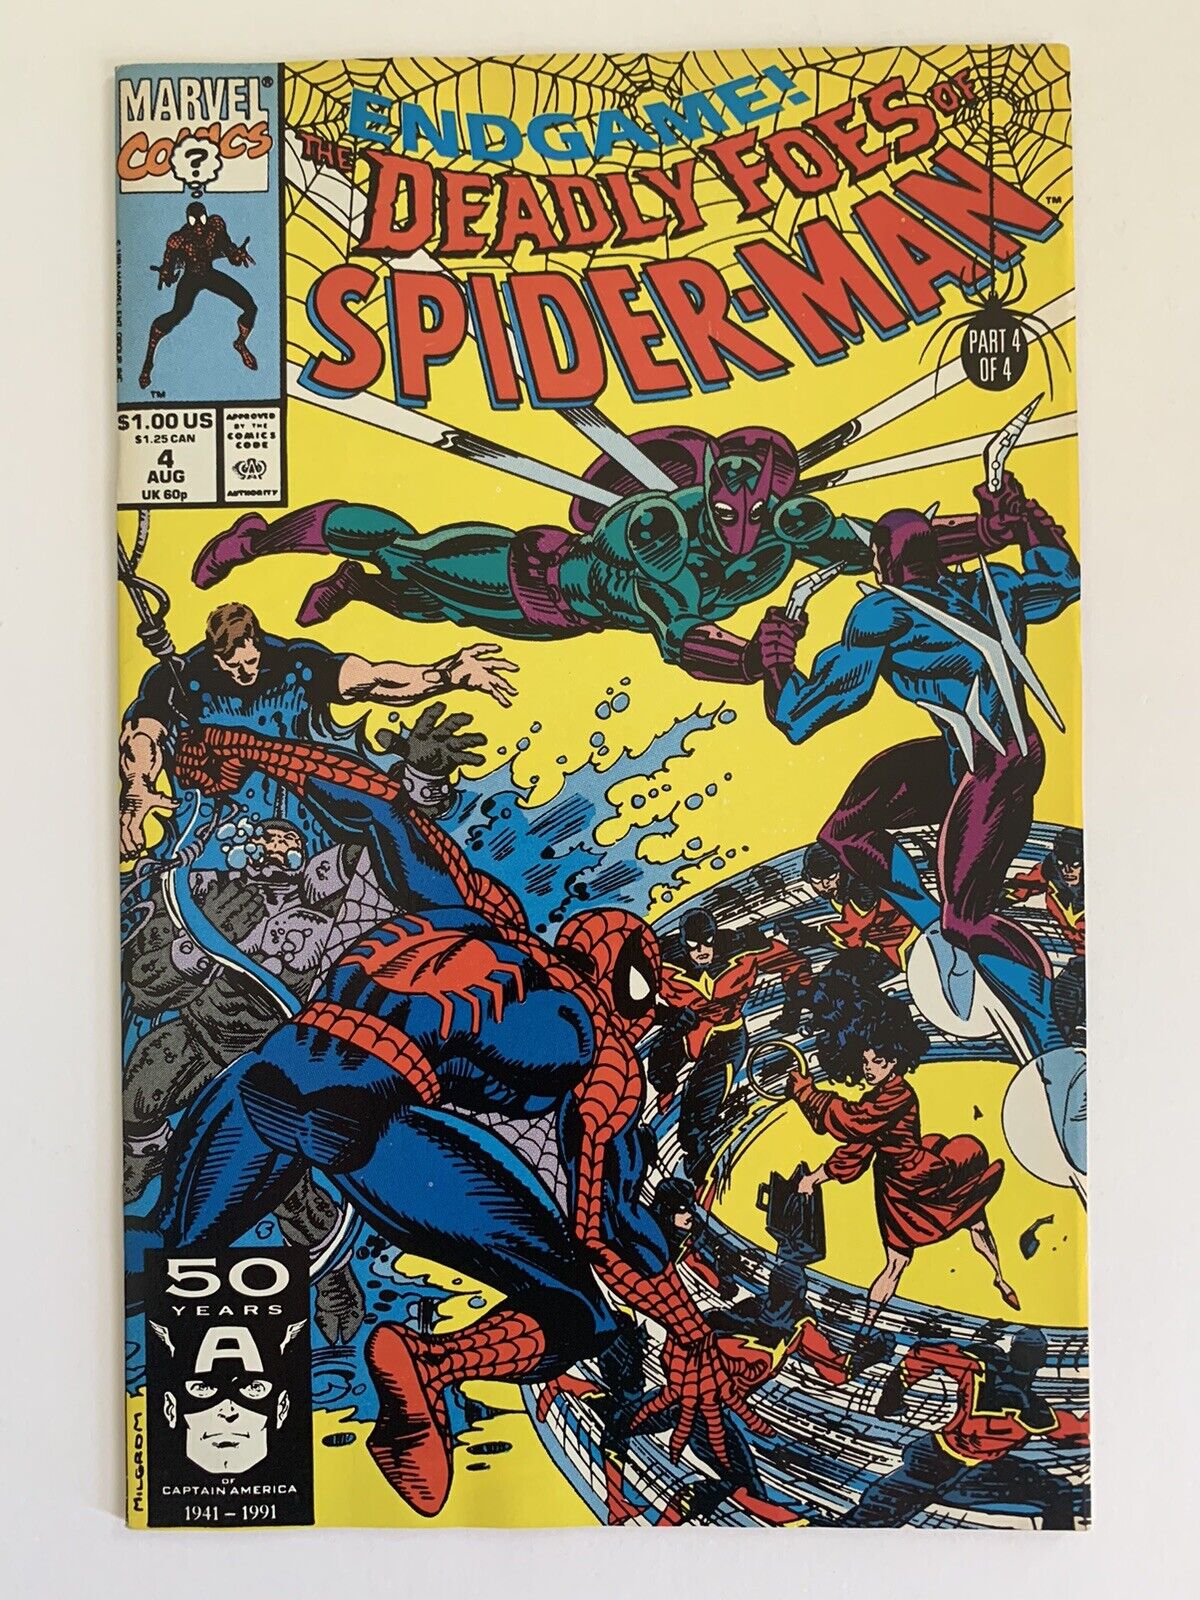 DEADLY FOES OF SPIDER-MAN #4 9.0 VF/NM 1991 1ST PRINT MAIN COVER MARVEL COMICS